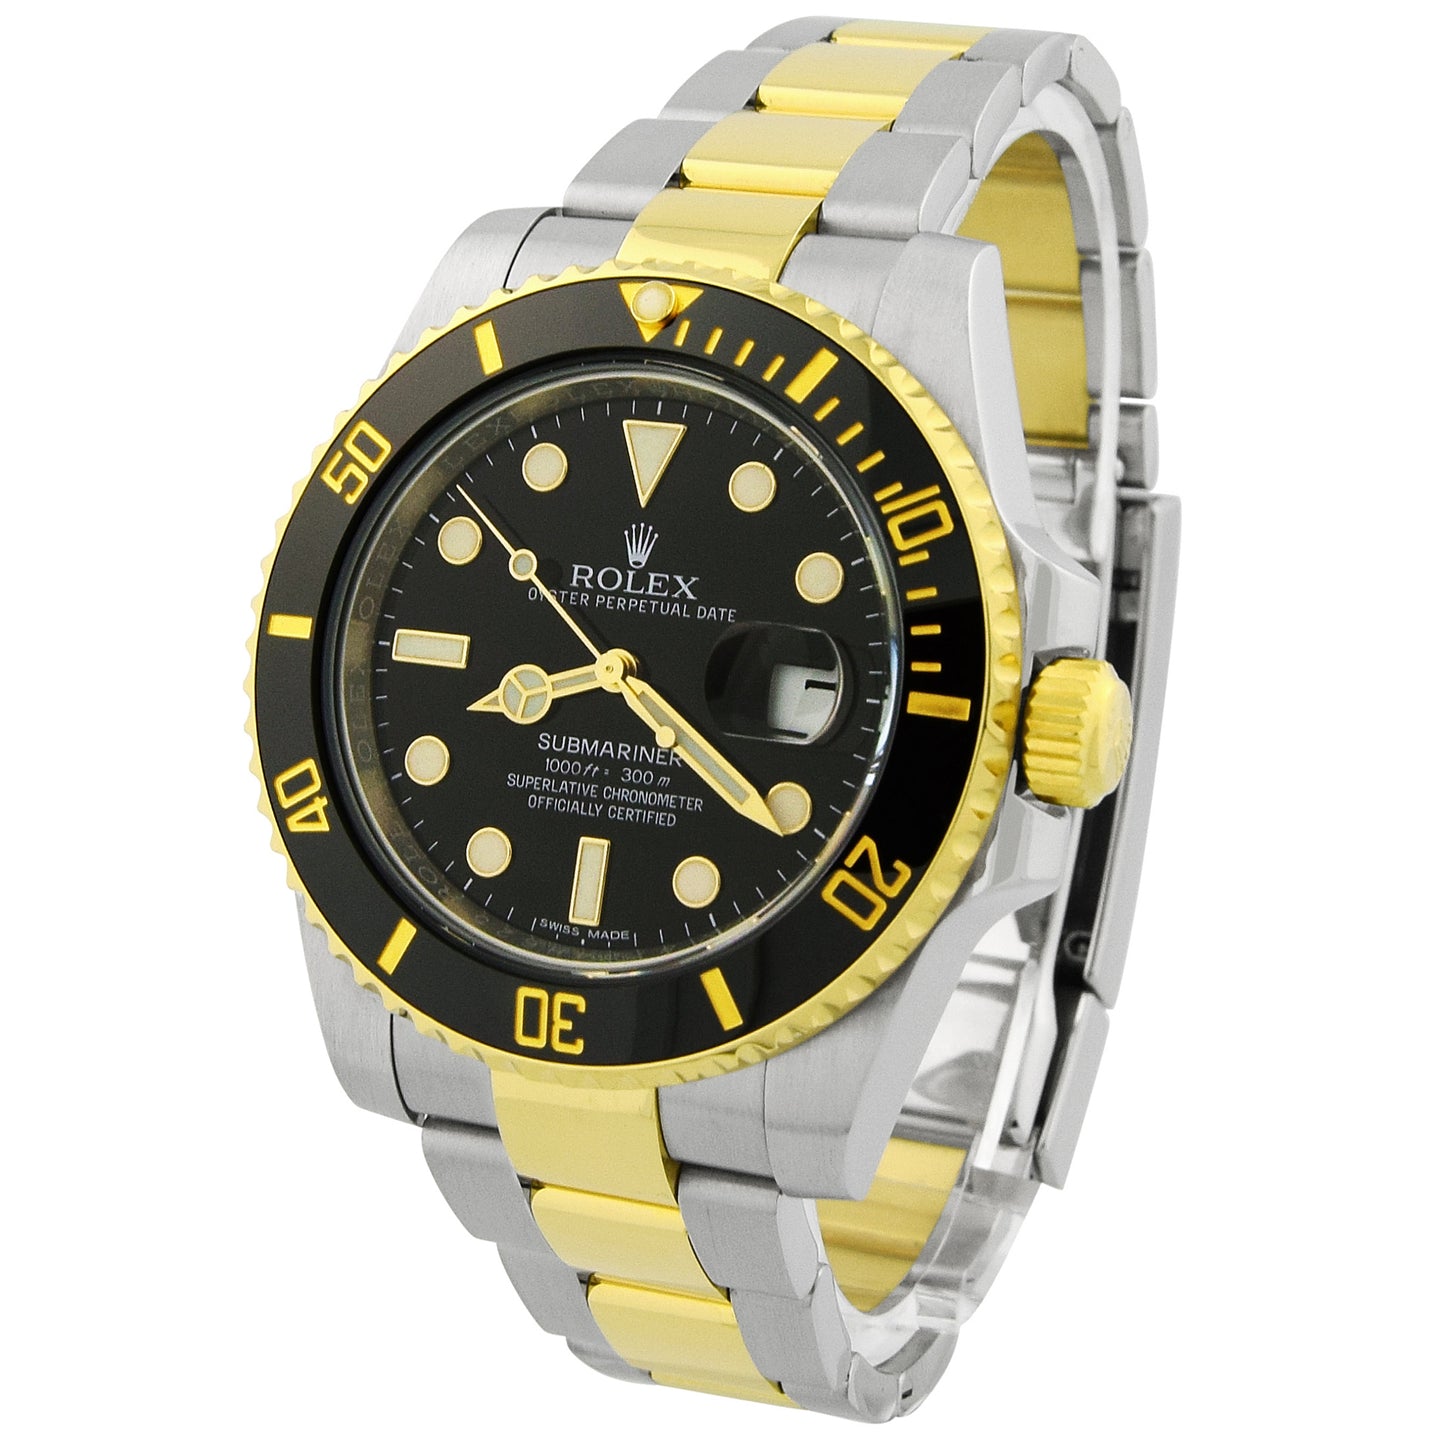 Rolex Submariner Two Tone Stainless Steel & Yellow Gold 40mm Black Dot Dial Watch Reference #: 116613LN